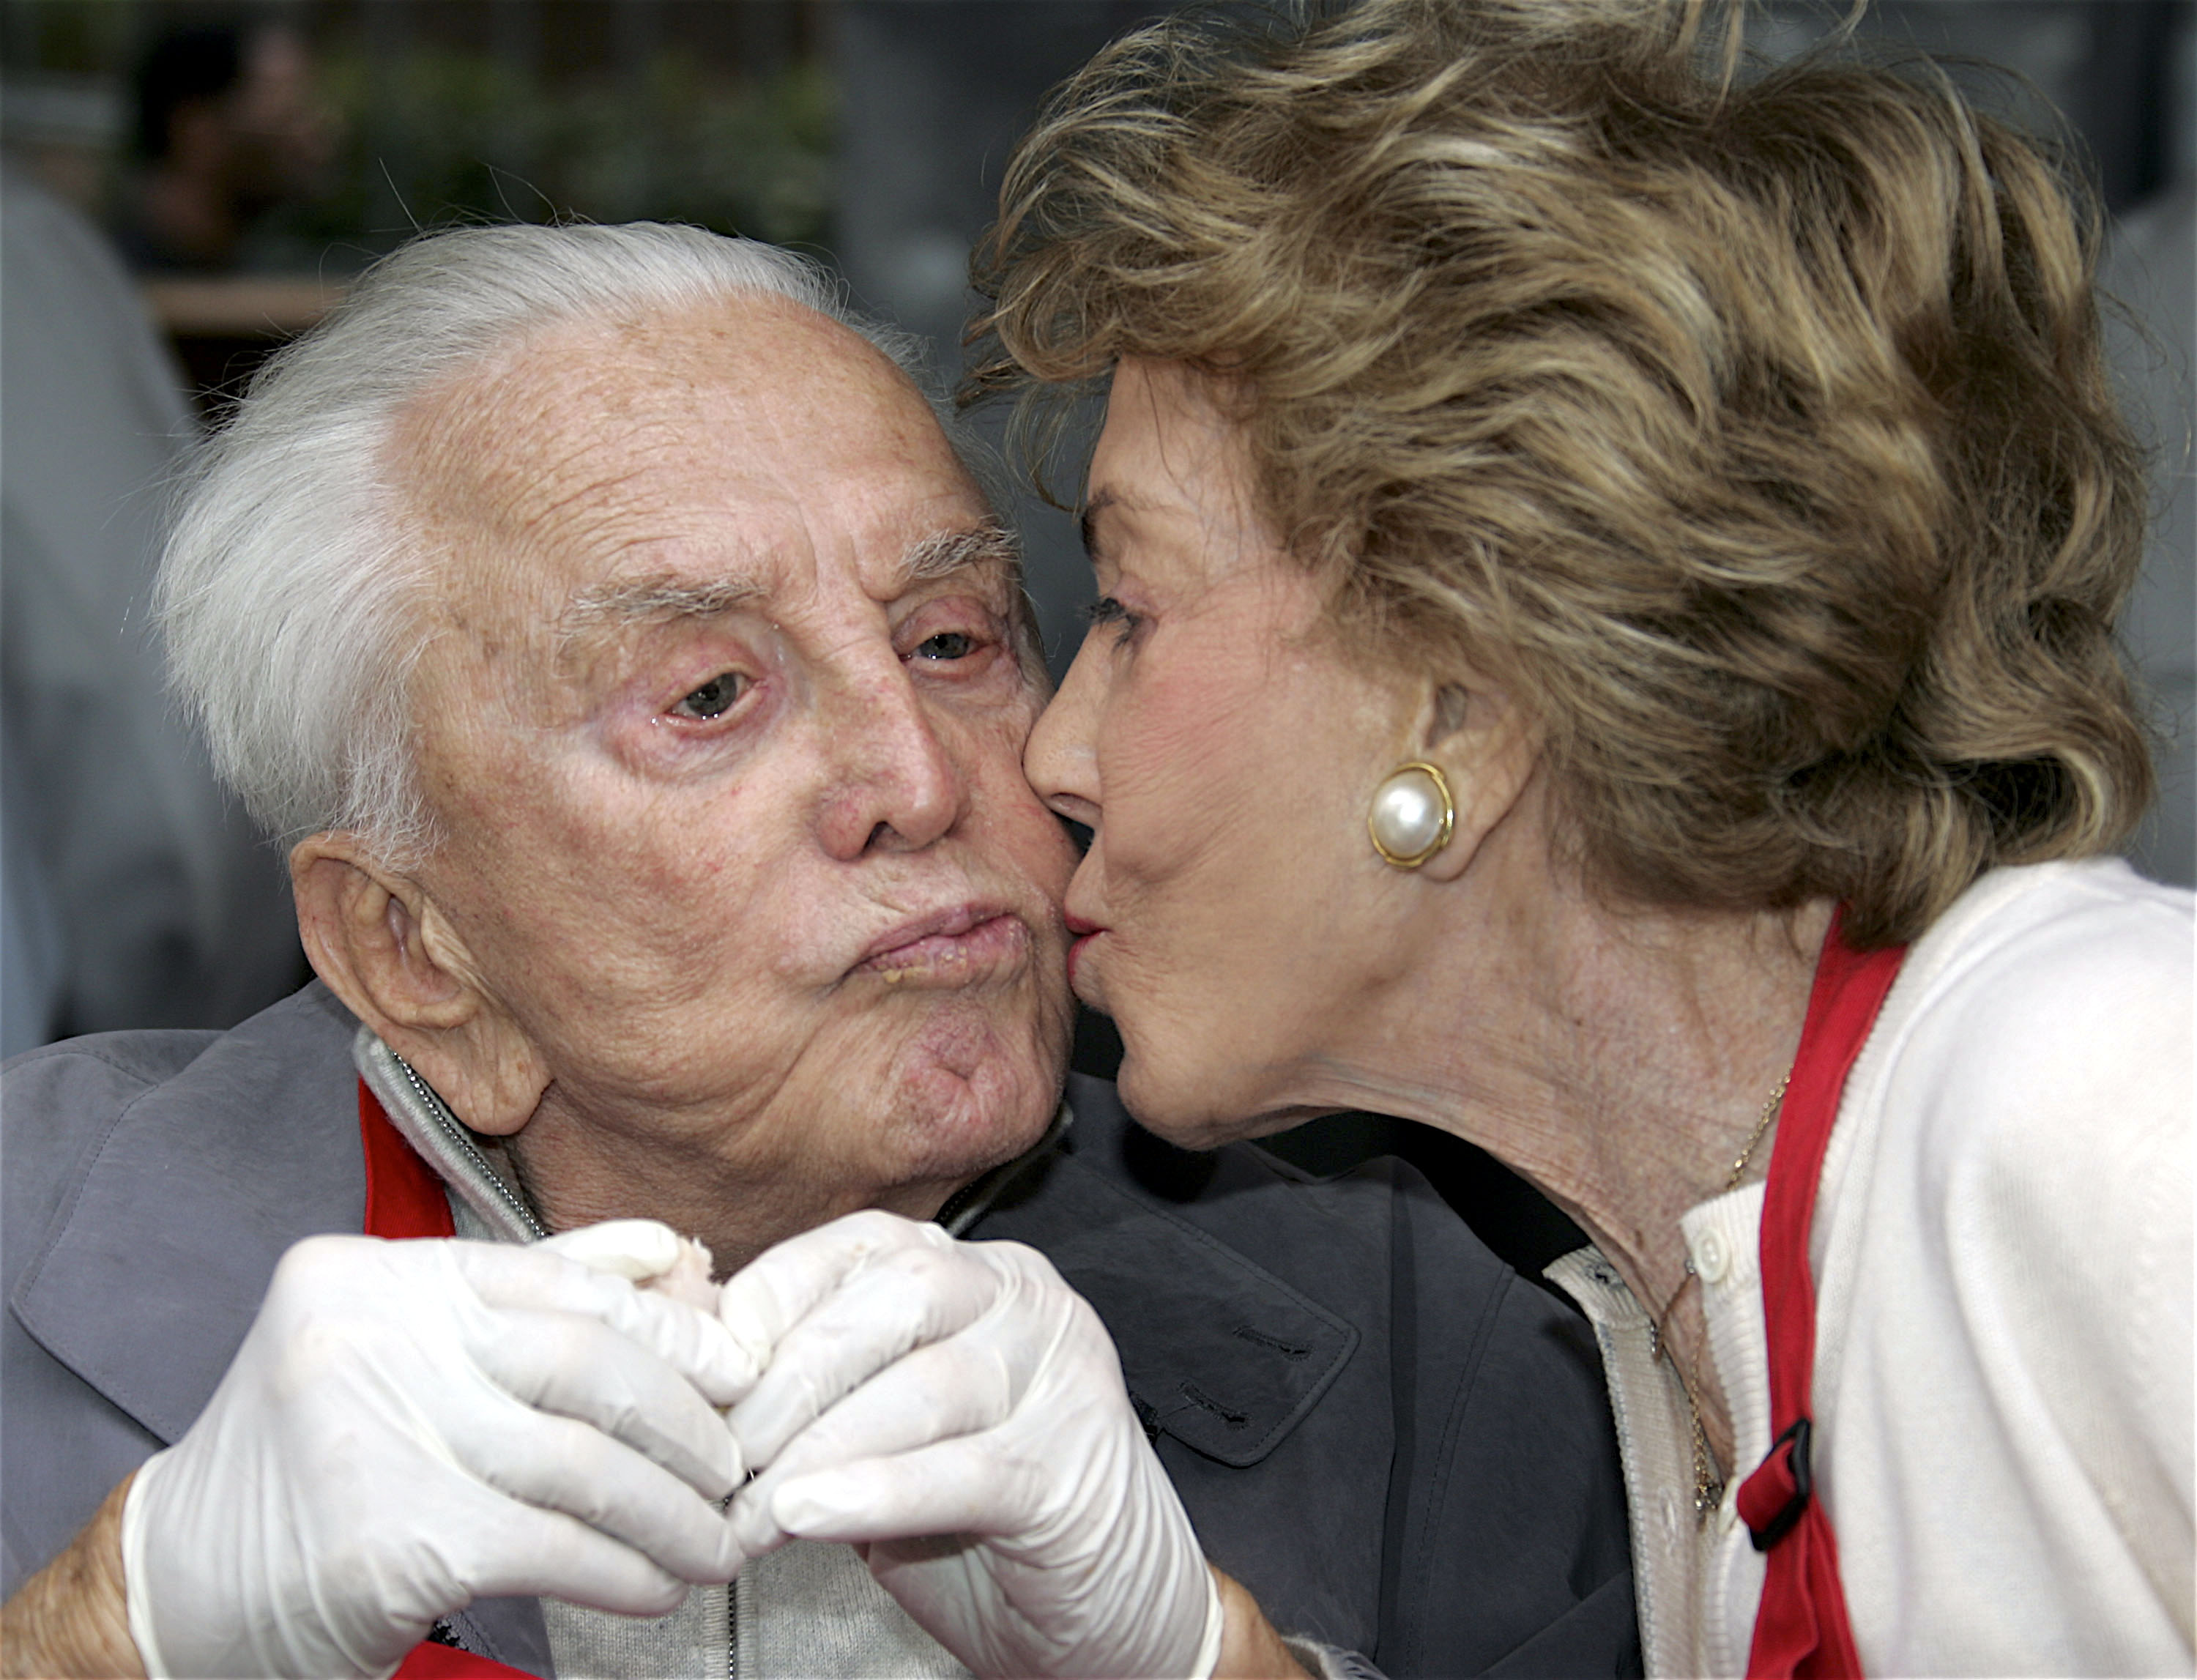 Actor Kirk Douglas receiving a kiss from his wife, Anne Buydens, between serving meals at the Los Angeles Mission and Anne Douglas Center's Thanksgiving Meal for the Homeless on November 23, 2005 in Los Angeles, California | Source: Getty Images